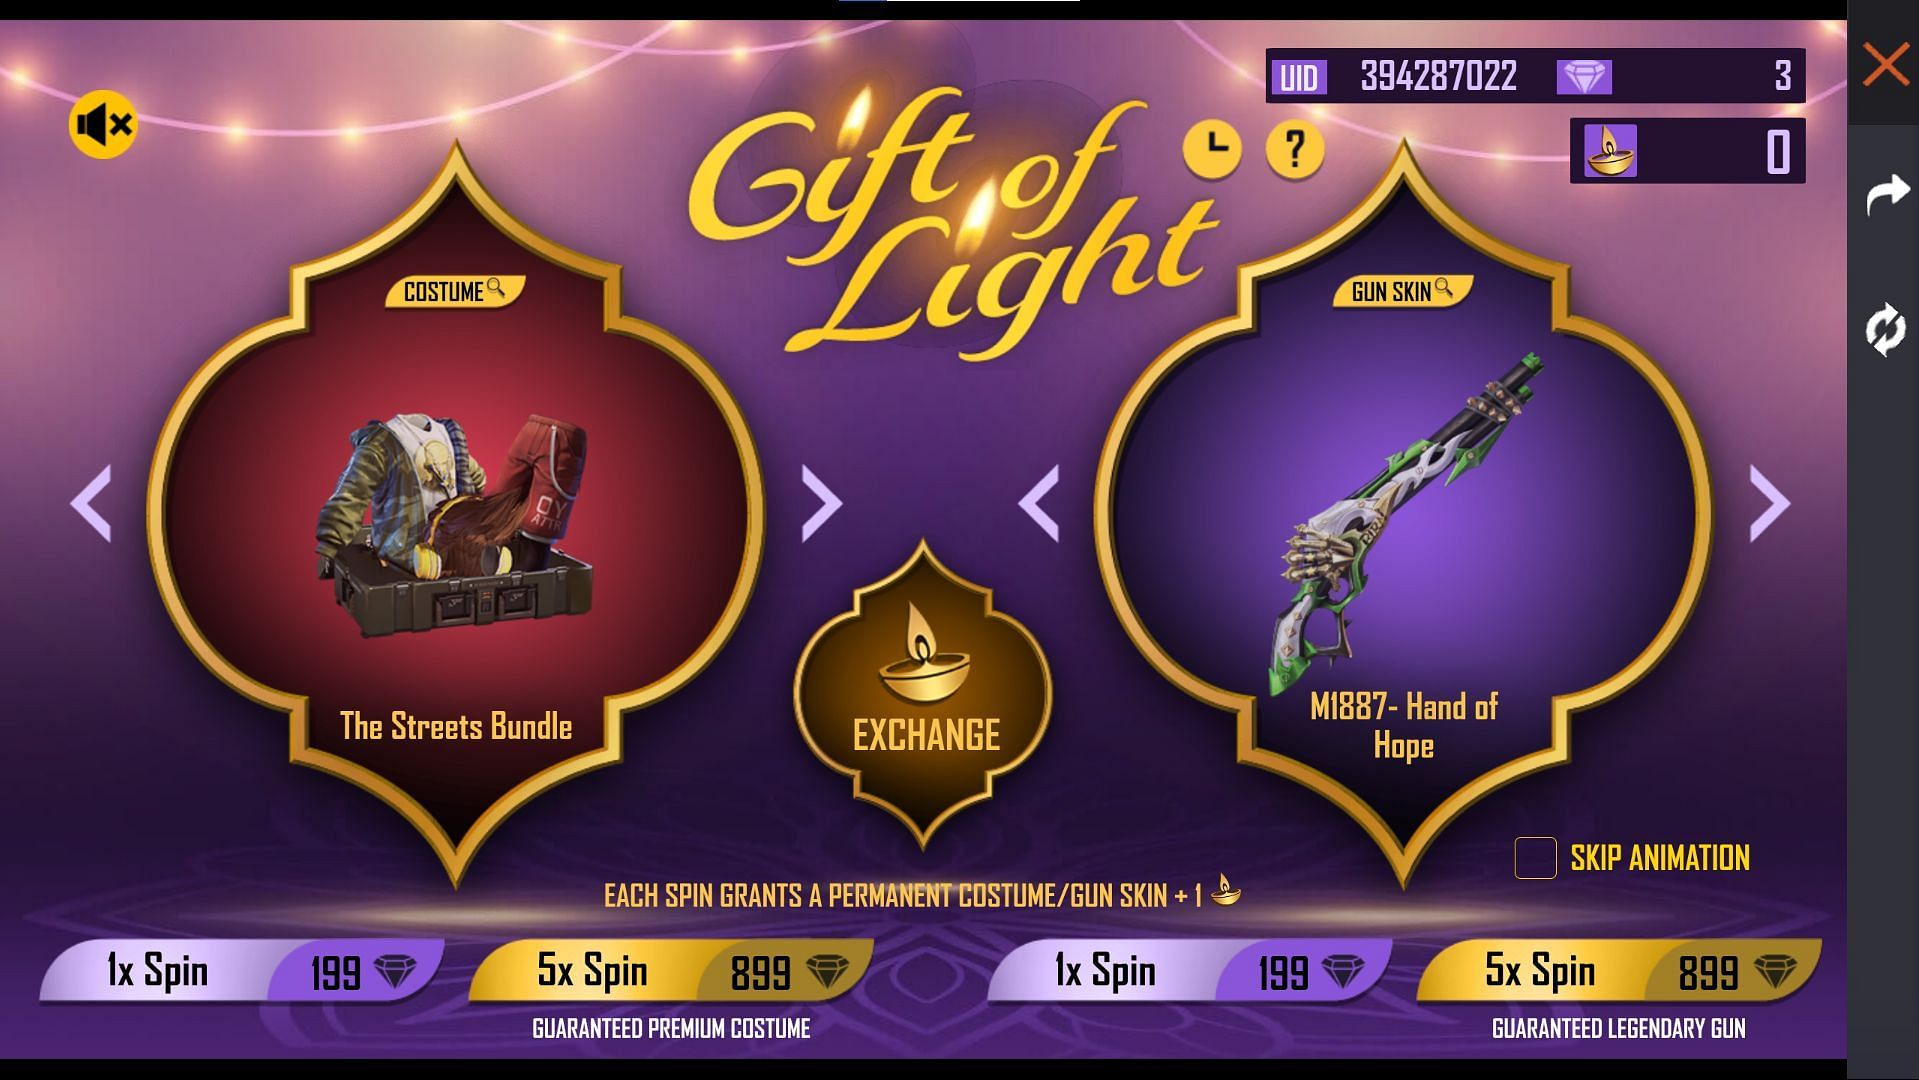 Gift of Light event offers gamers an opportunity to get a variety of rewards (Image via Free Fire)